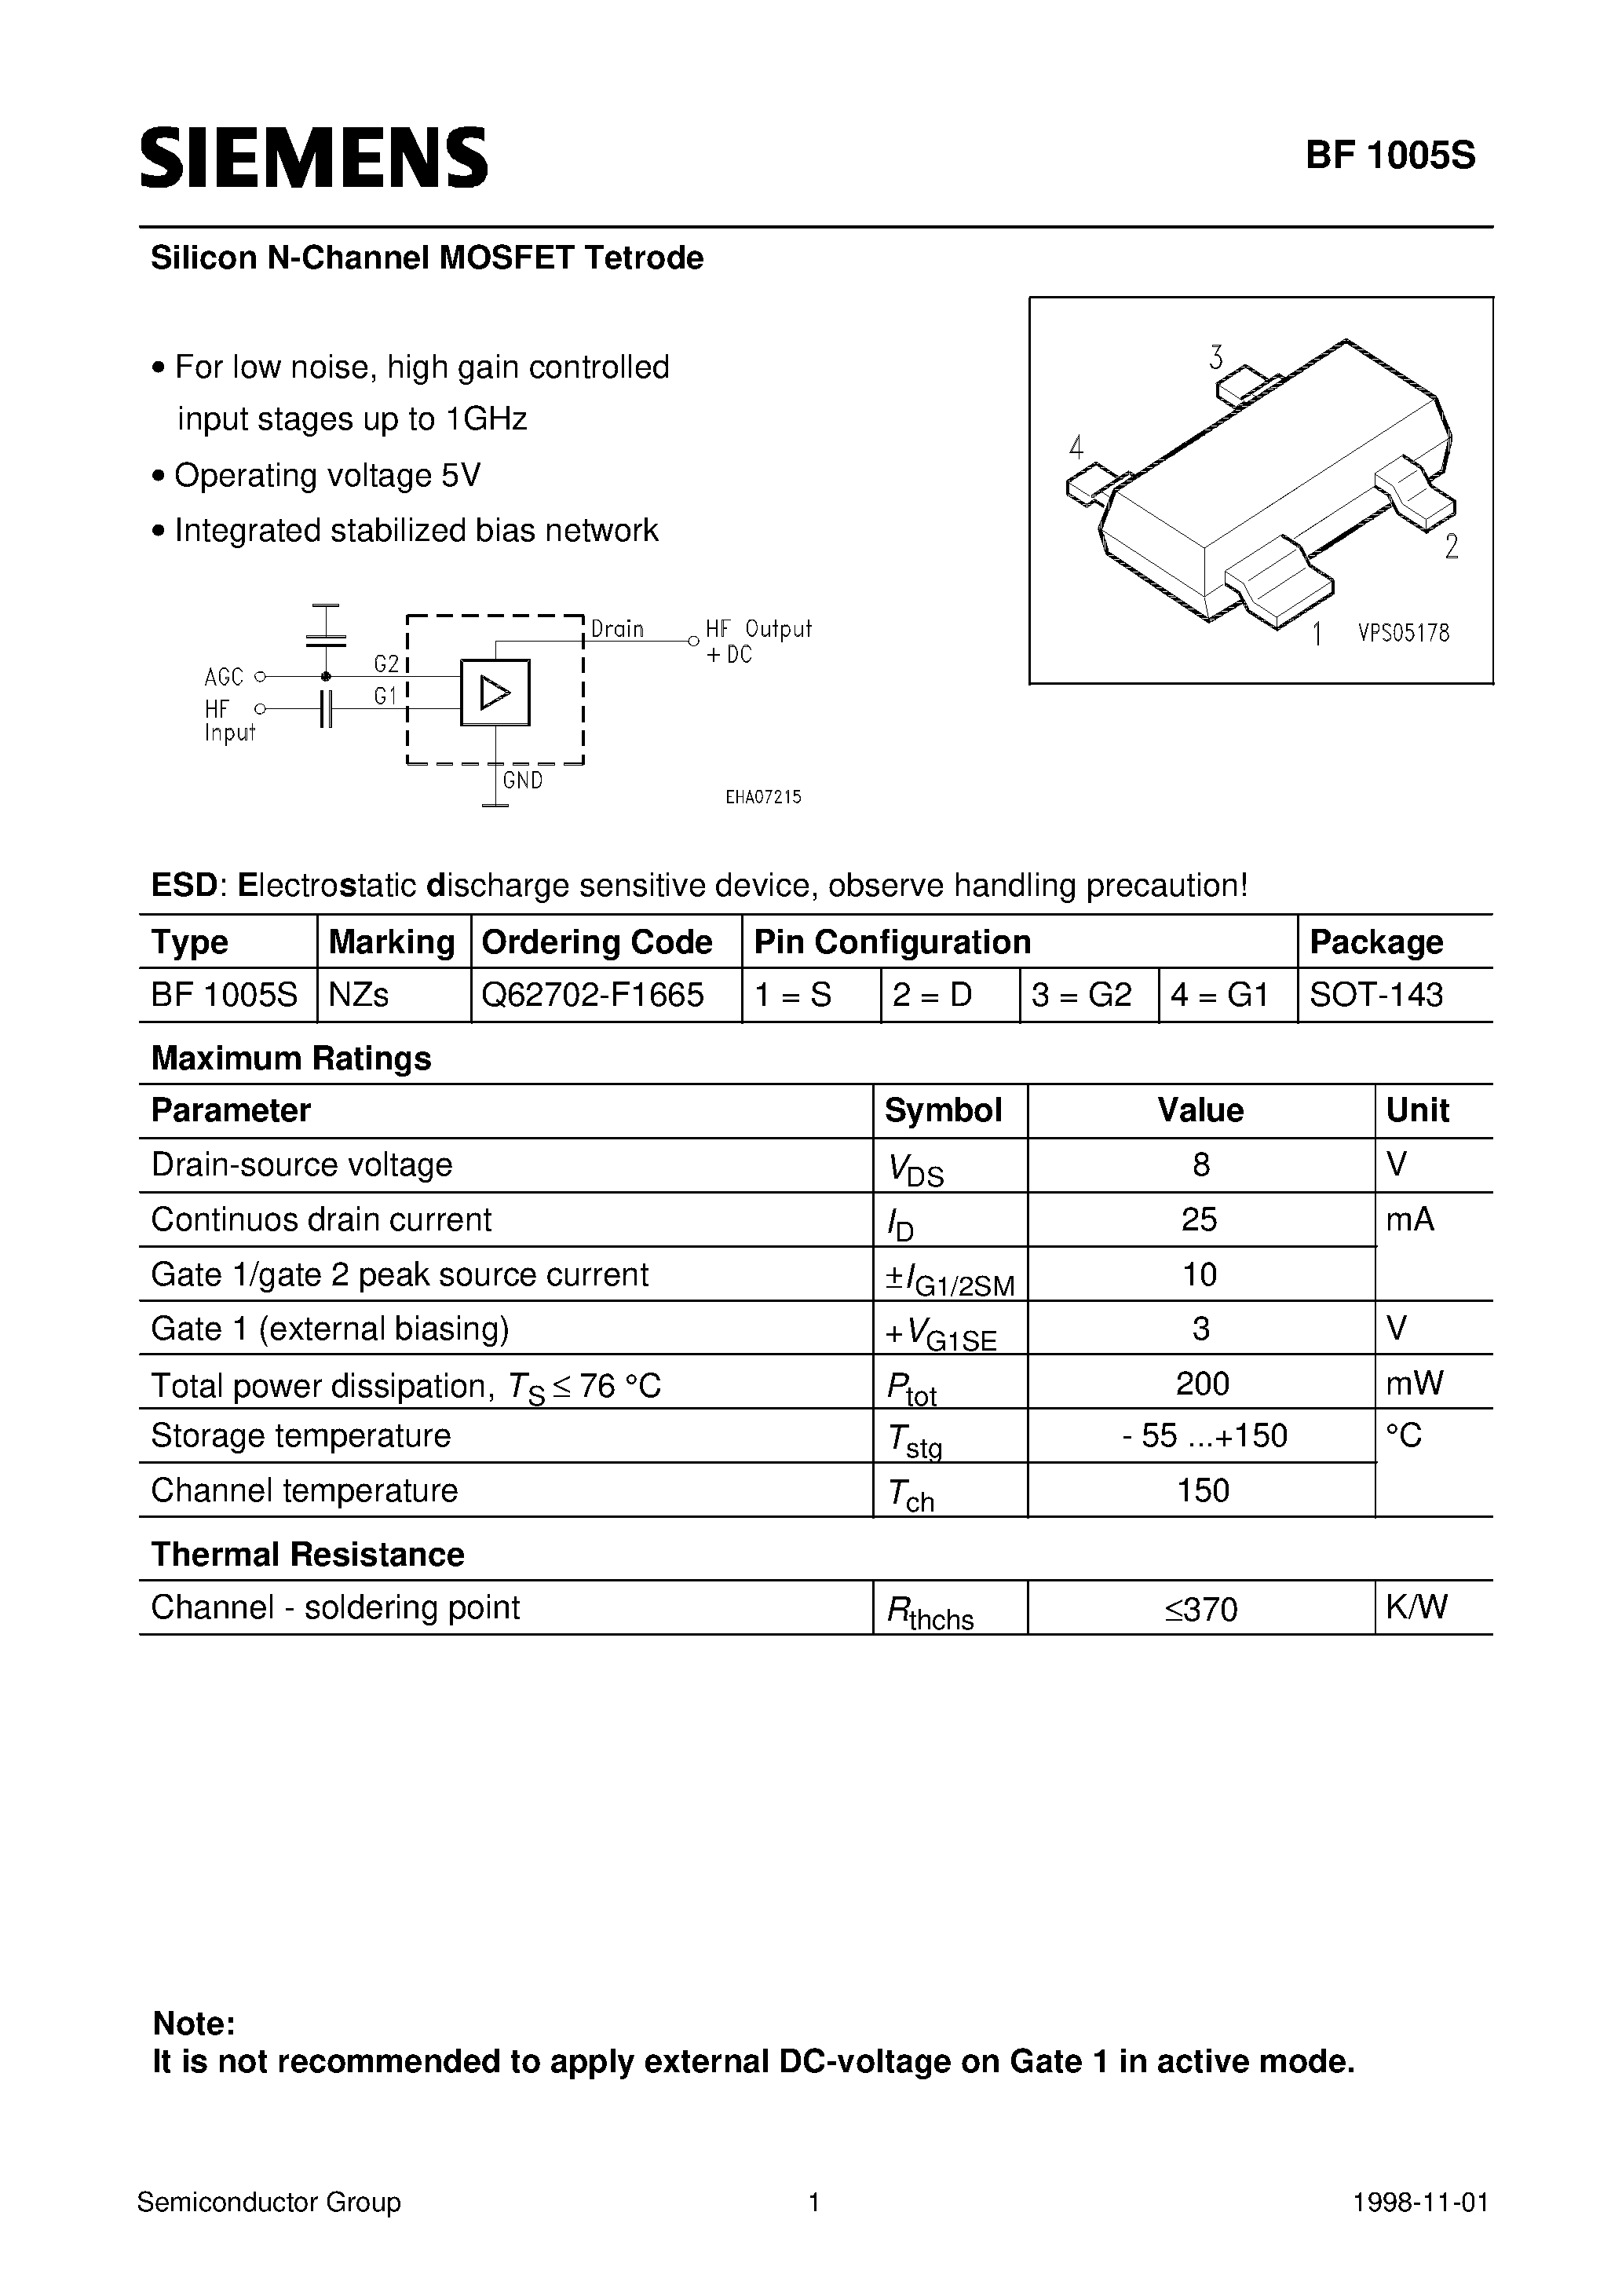 Datasheet BF1005S - Silicon N-Channel MOSFET Tetrode (For low noise/ high gain controlled input stages up to 1GHz Operating voltage 5V Integrated stabilized bias network) page 1